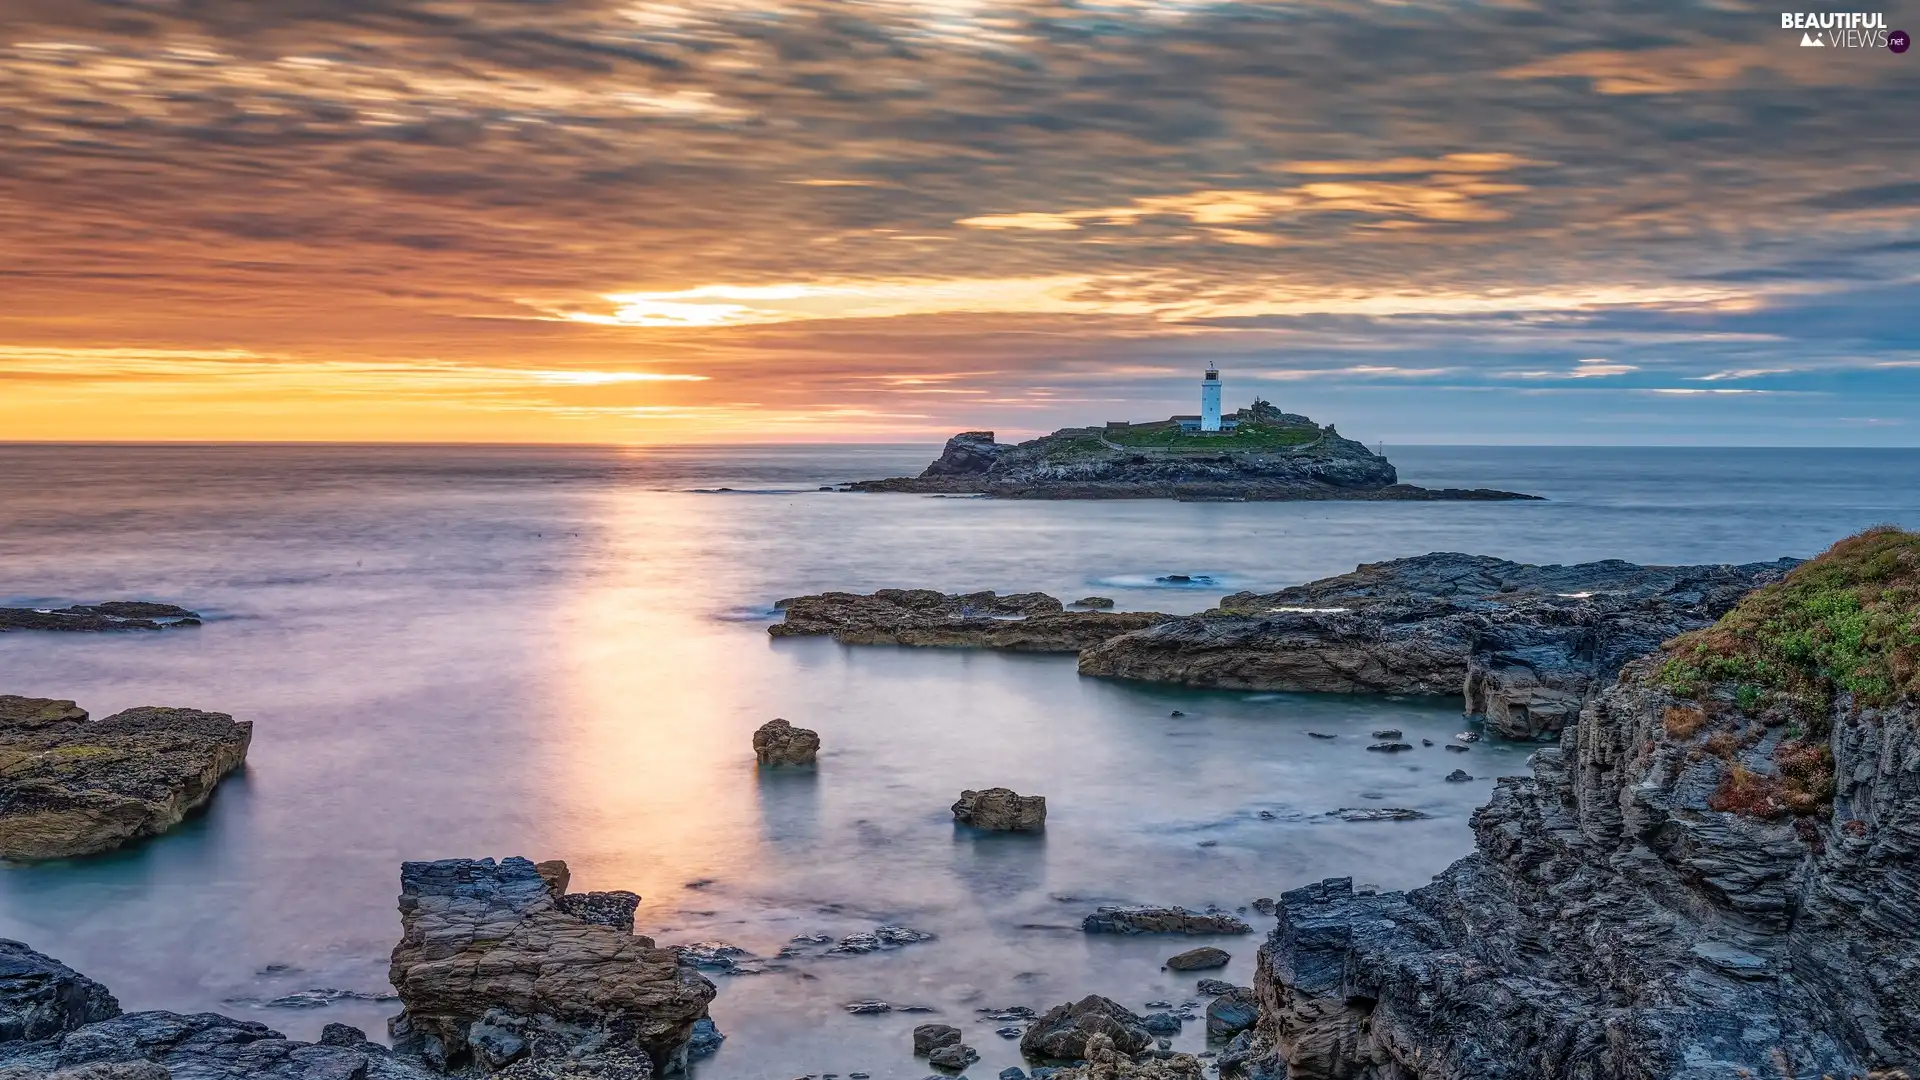 Godrevy Lighthouse, Cornwall, clouds, sea, England, rocks, Great Sunsets